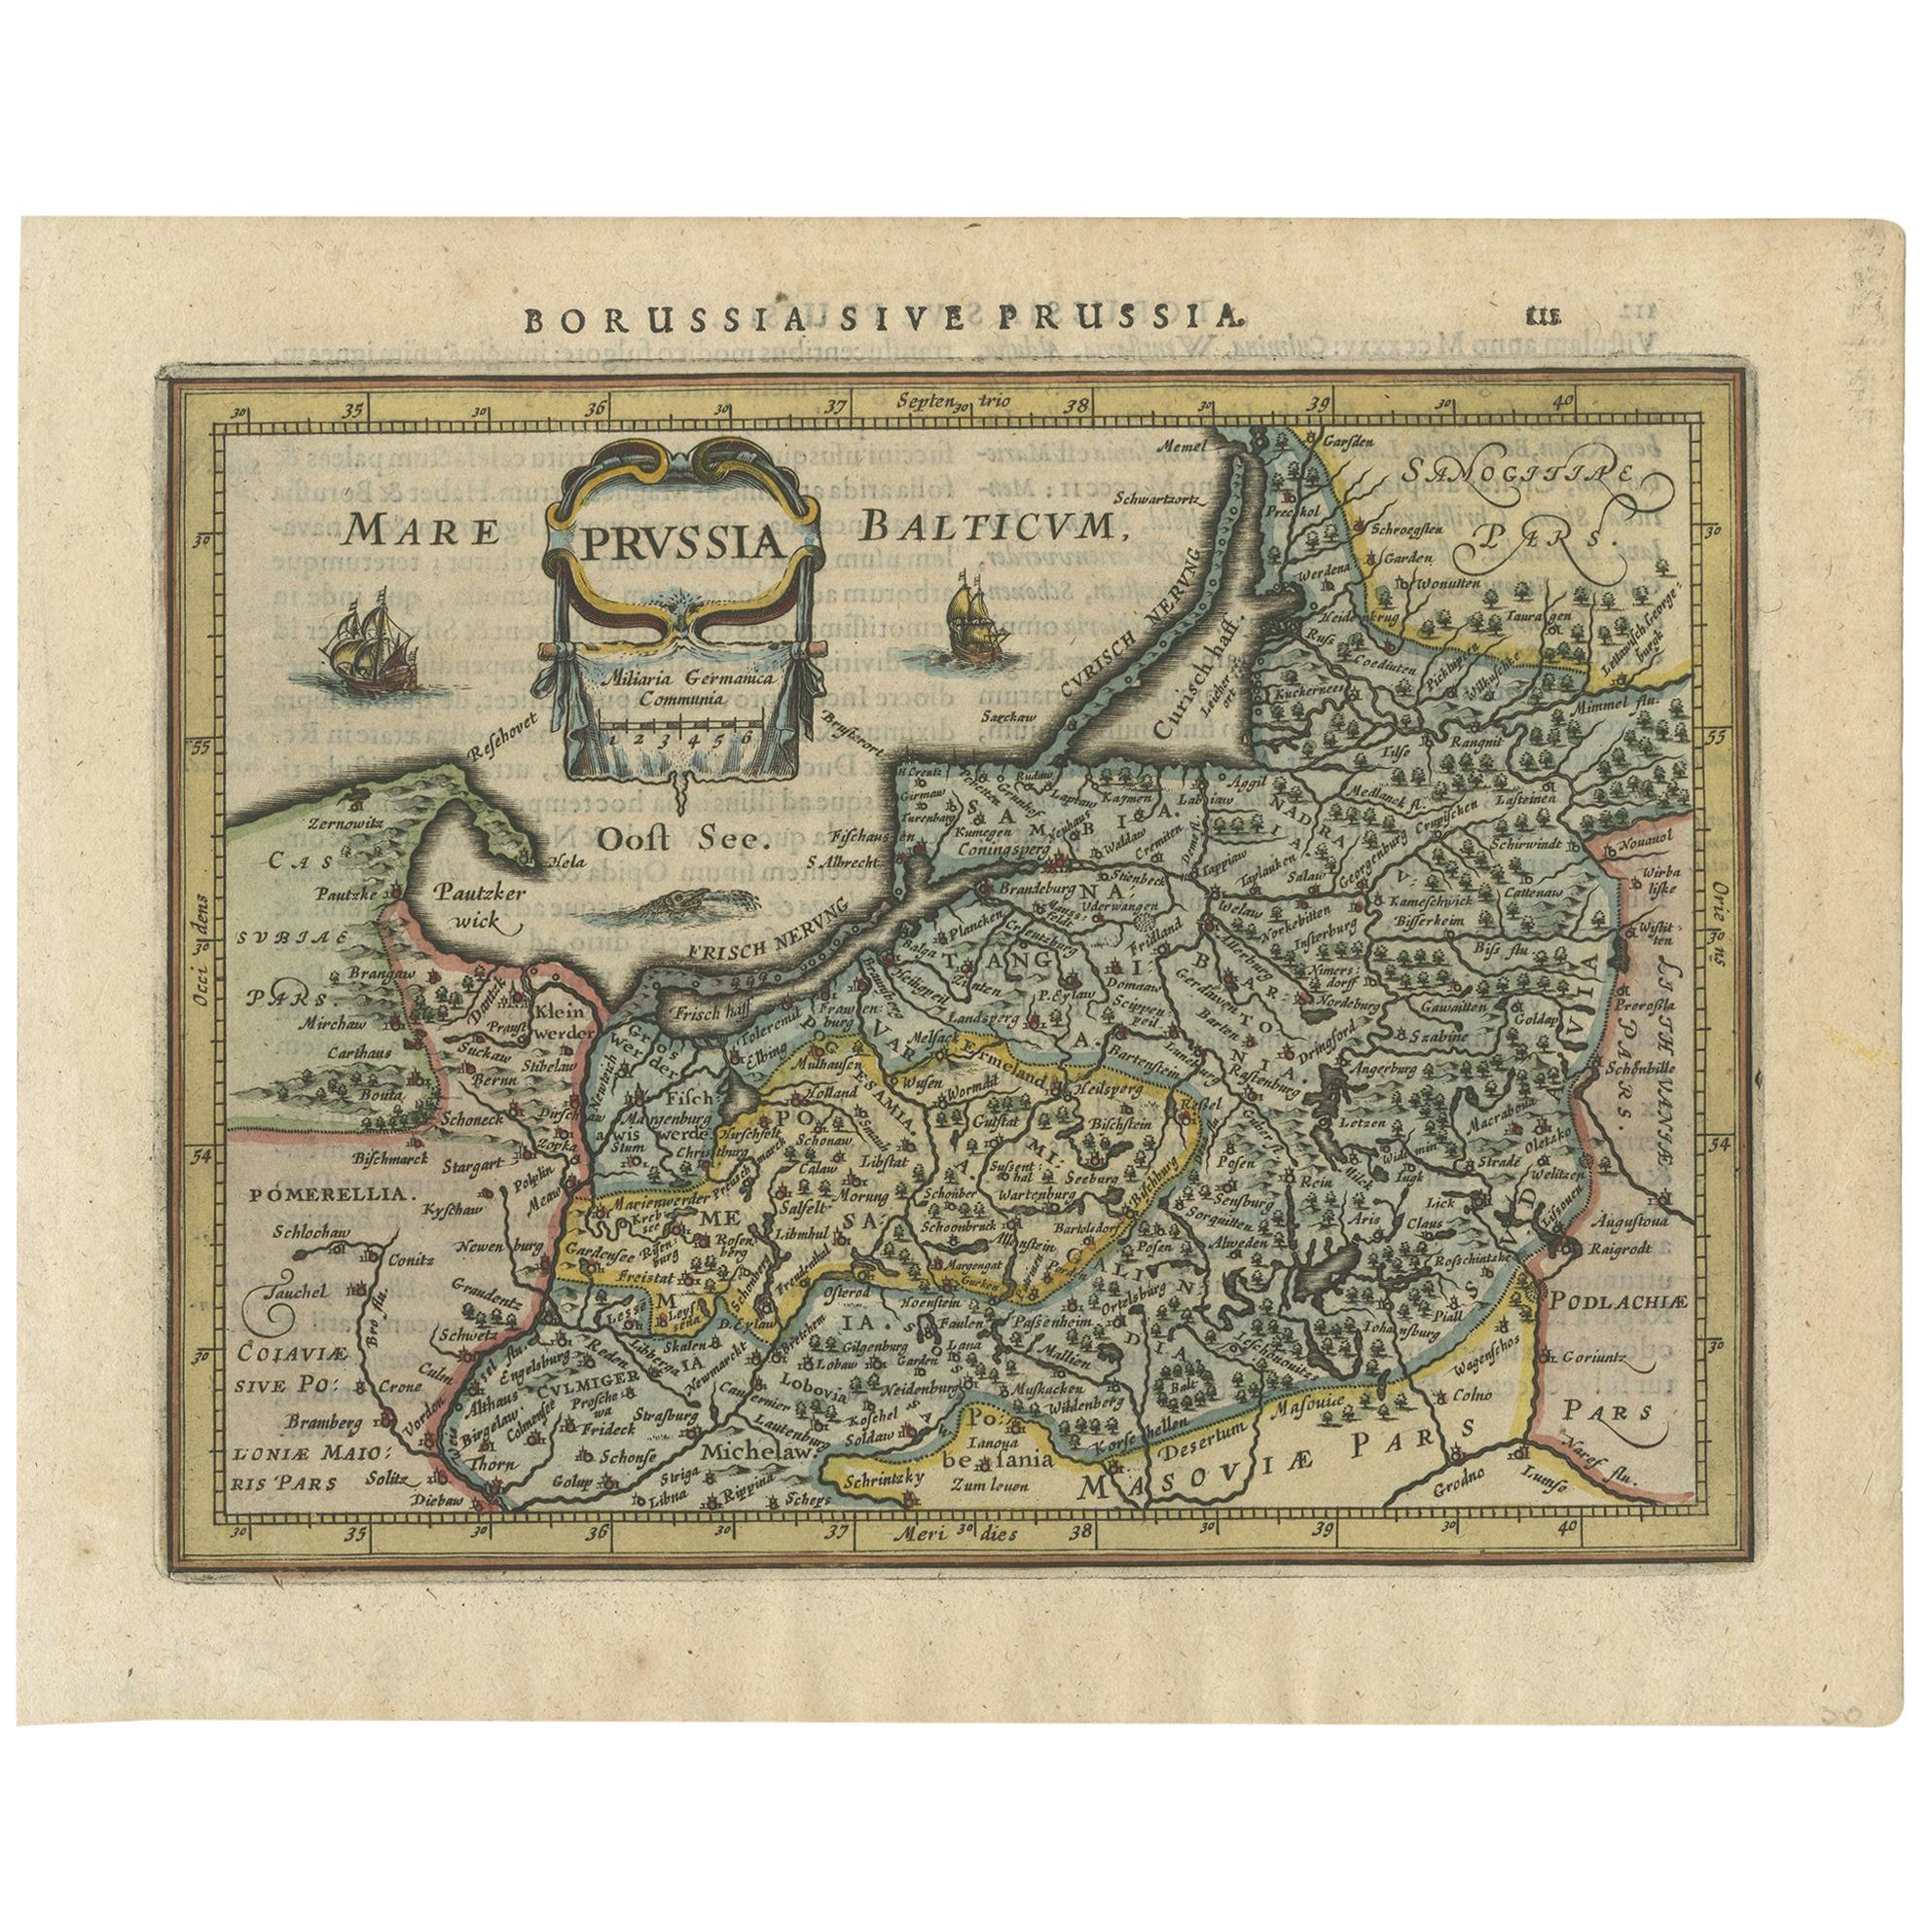 Antique Map of Prussia by Janssonius, 1628